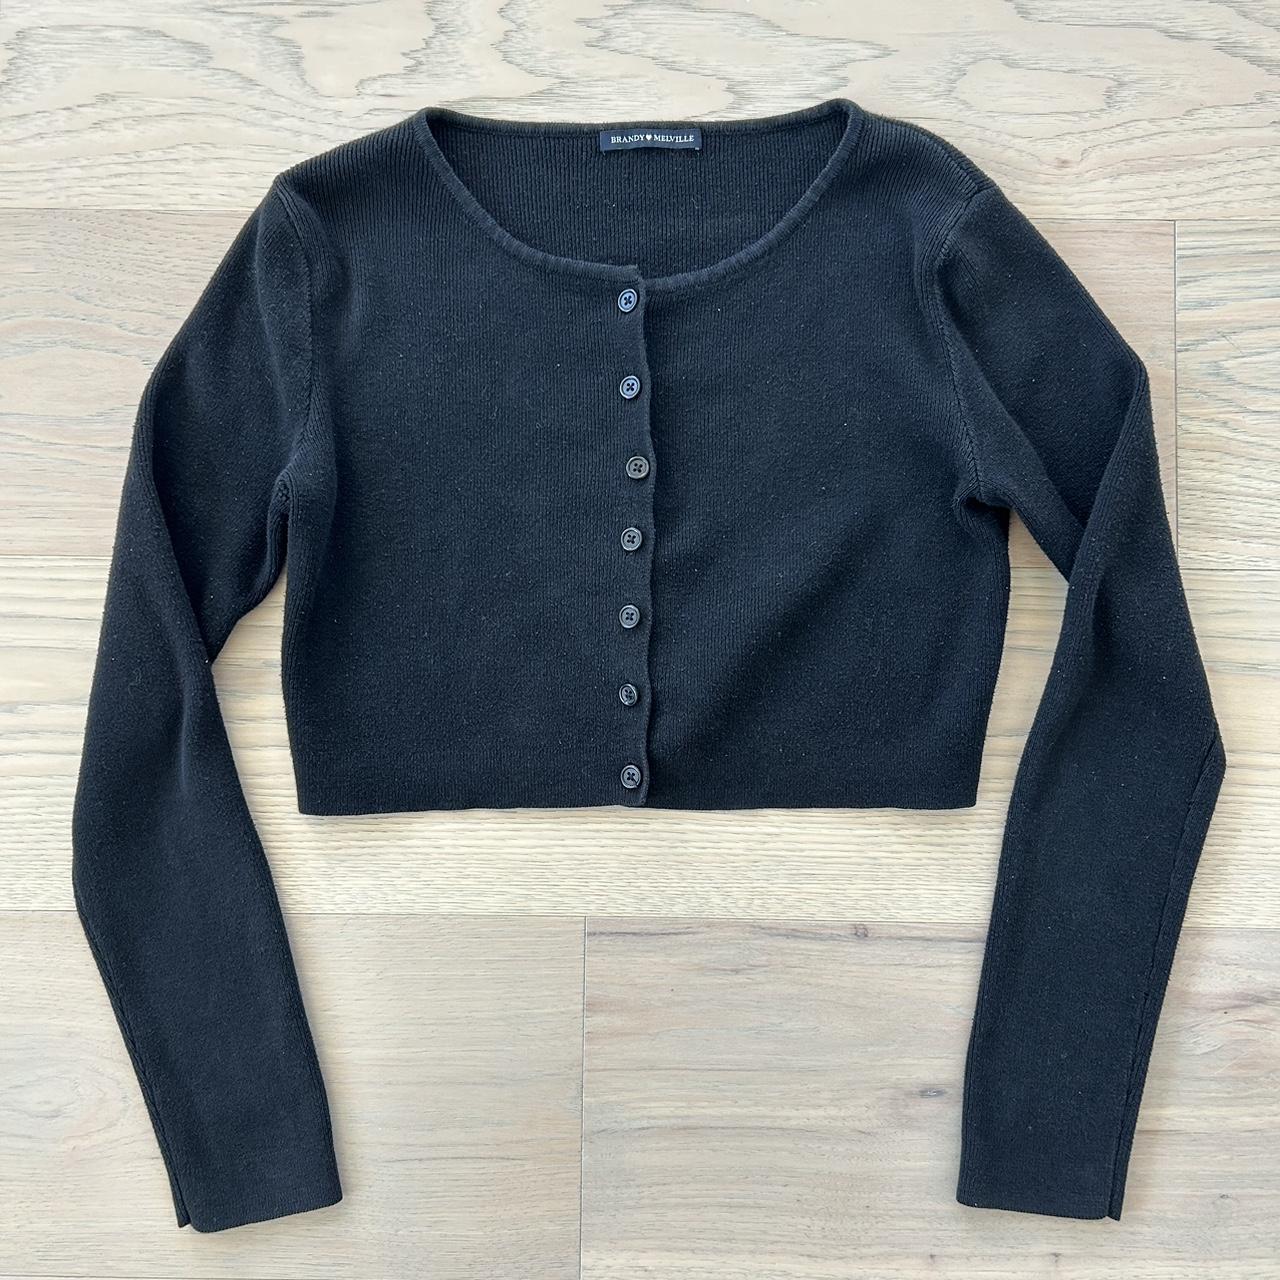 Brandy Melville Black Breathable Lightweight Cardigan  Made in Italy -  Rock It! Resell - Family Consignment